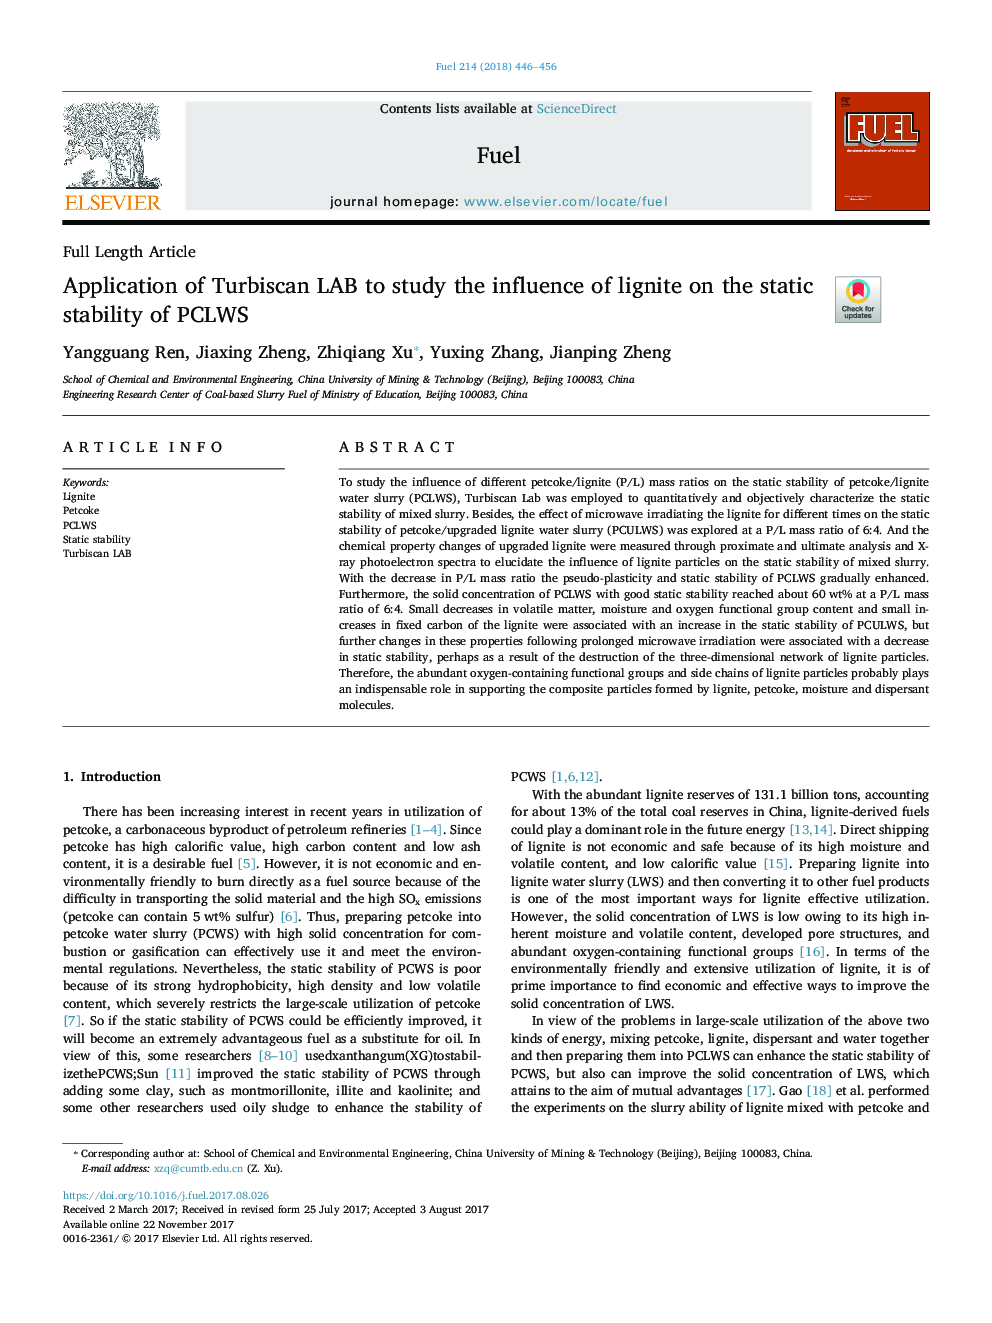 Application of Turbiscan LAB to study the influence of lignite on the static stability of PCLWS